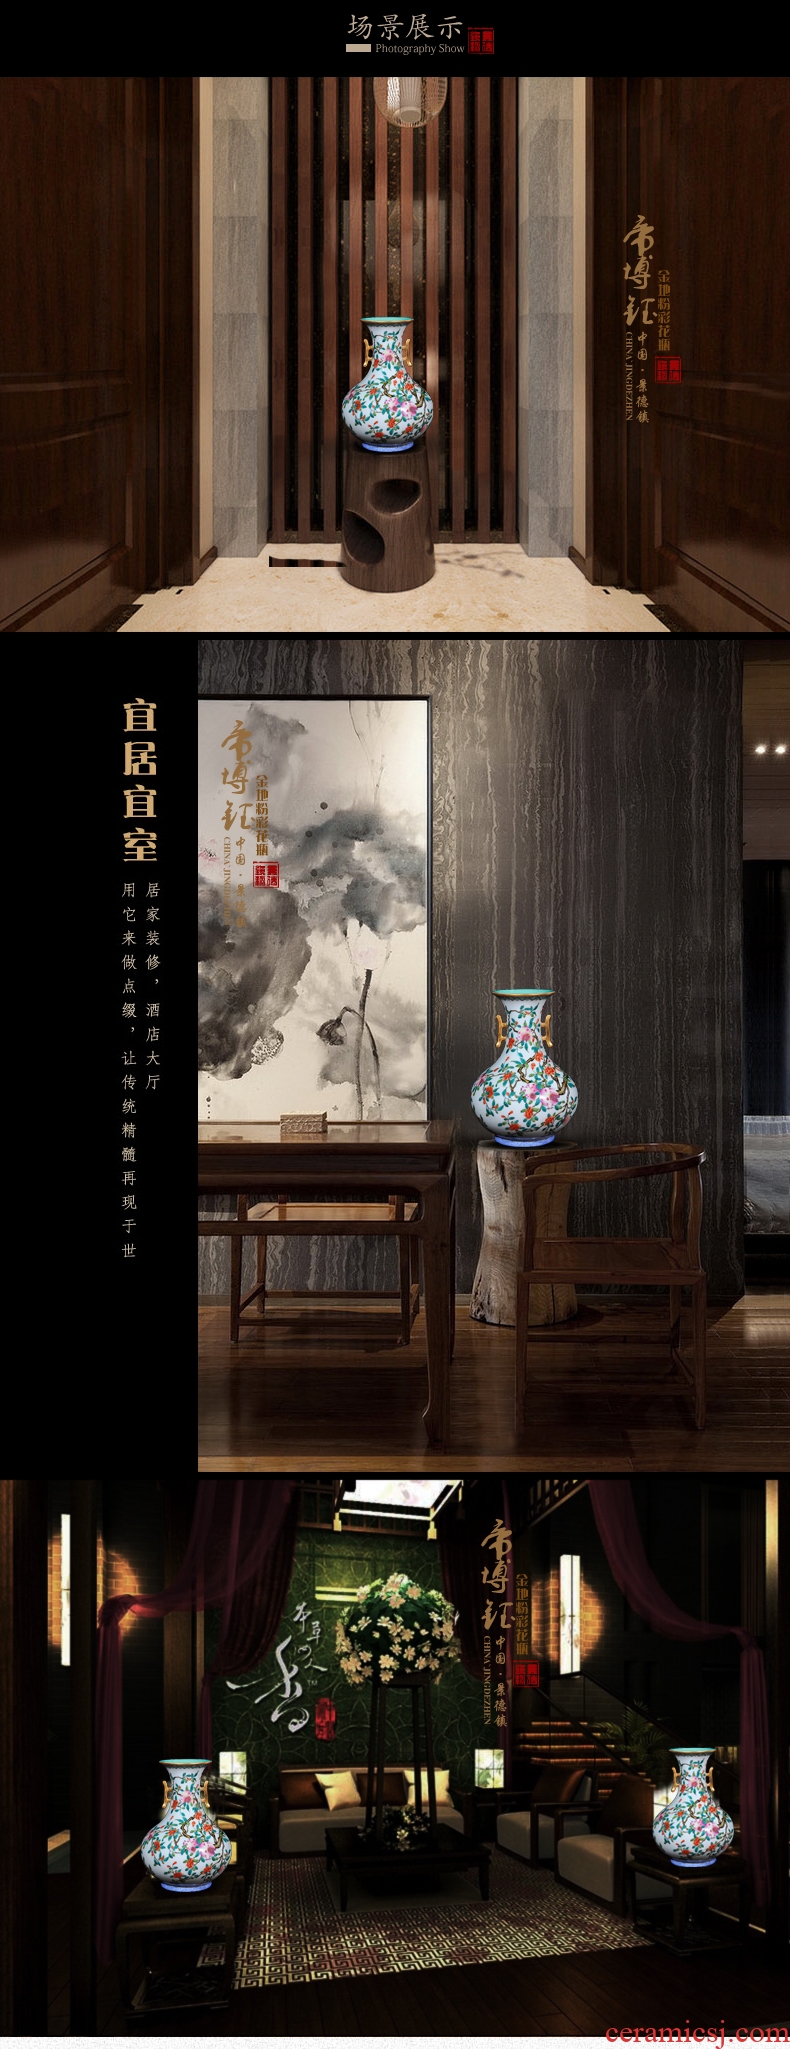 Archaize of jingdezhen ceramic vase pastel qianlong vase ears mesa collection process home furnishing articles in the living room